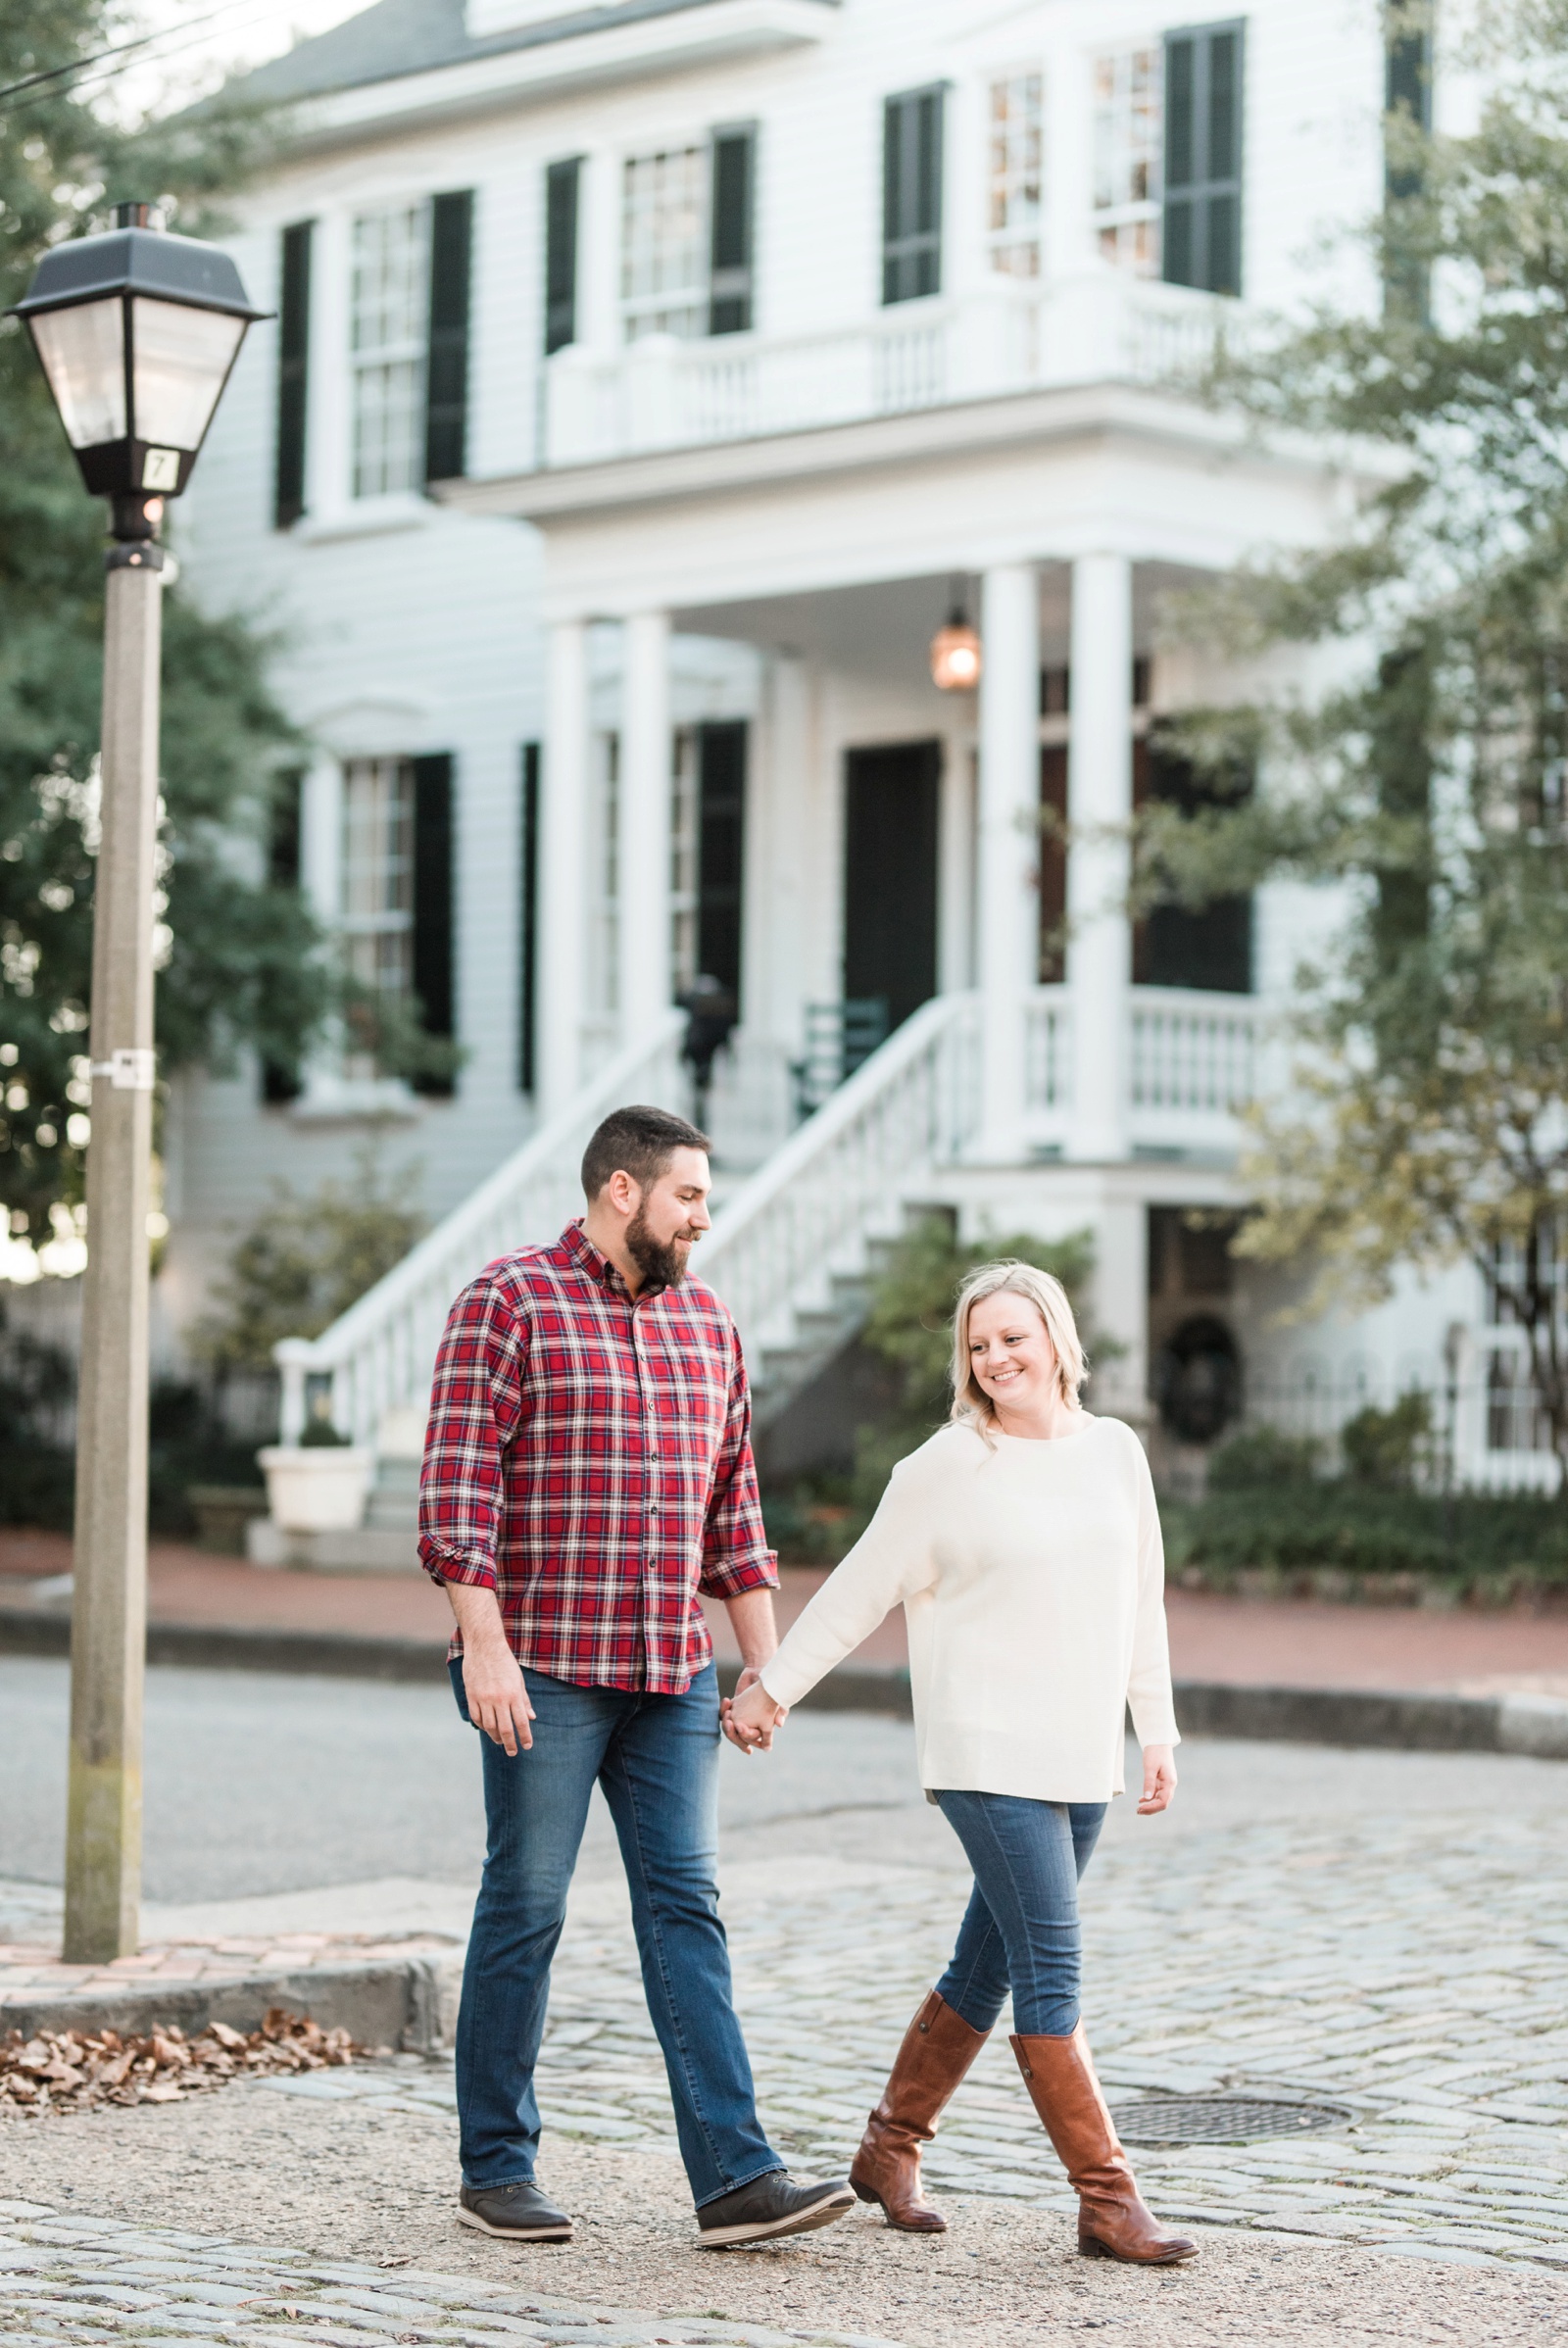 downtown-norfolk-virginia-fall-engagement-session-photo_2315.jpg